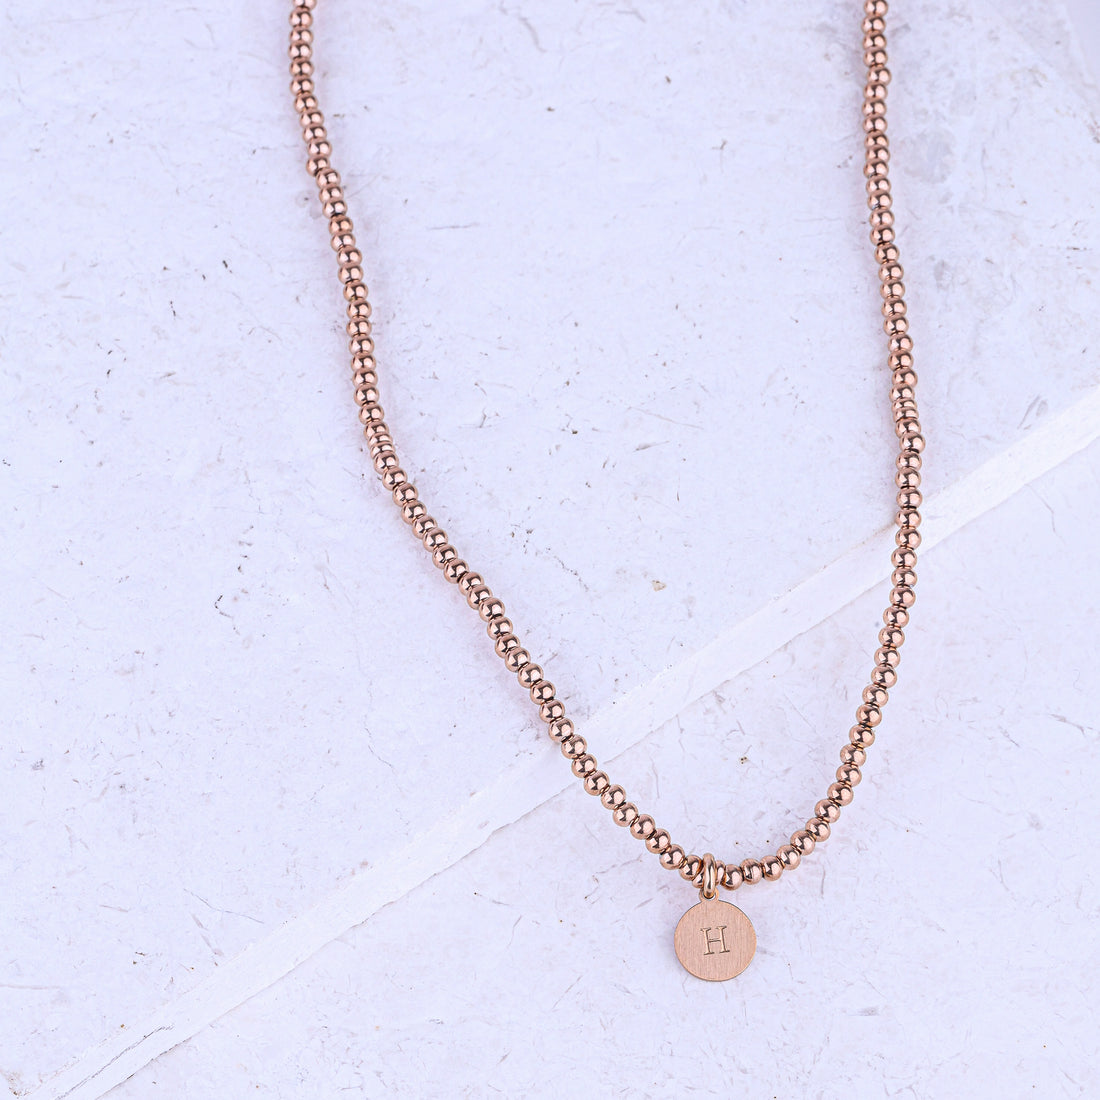 MICRO GEMSTONE NECKLACE - ROSE GOLD